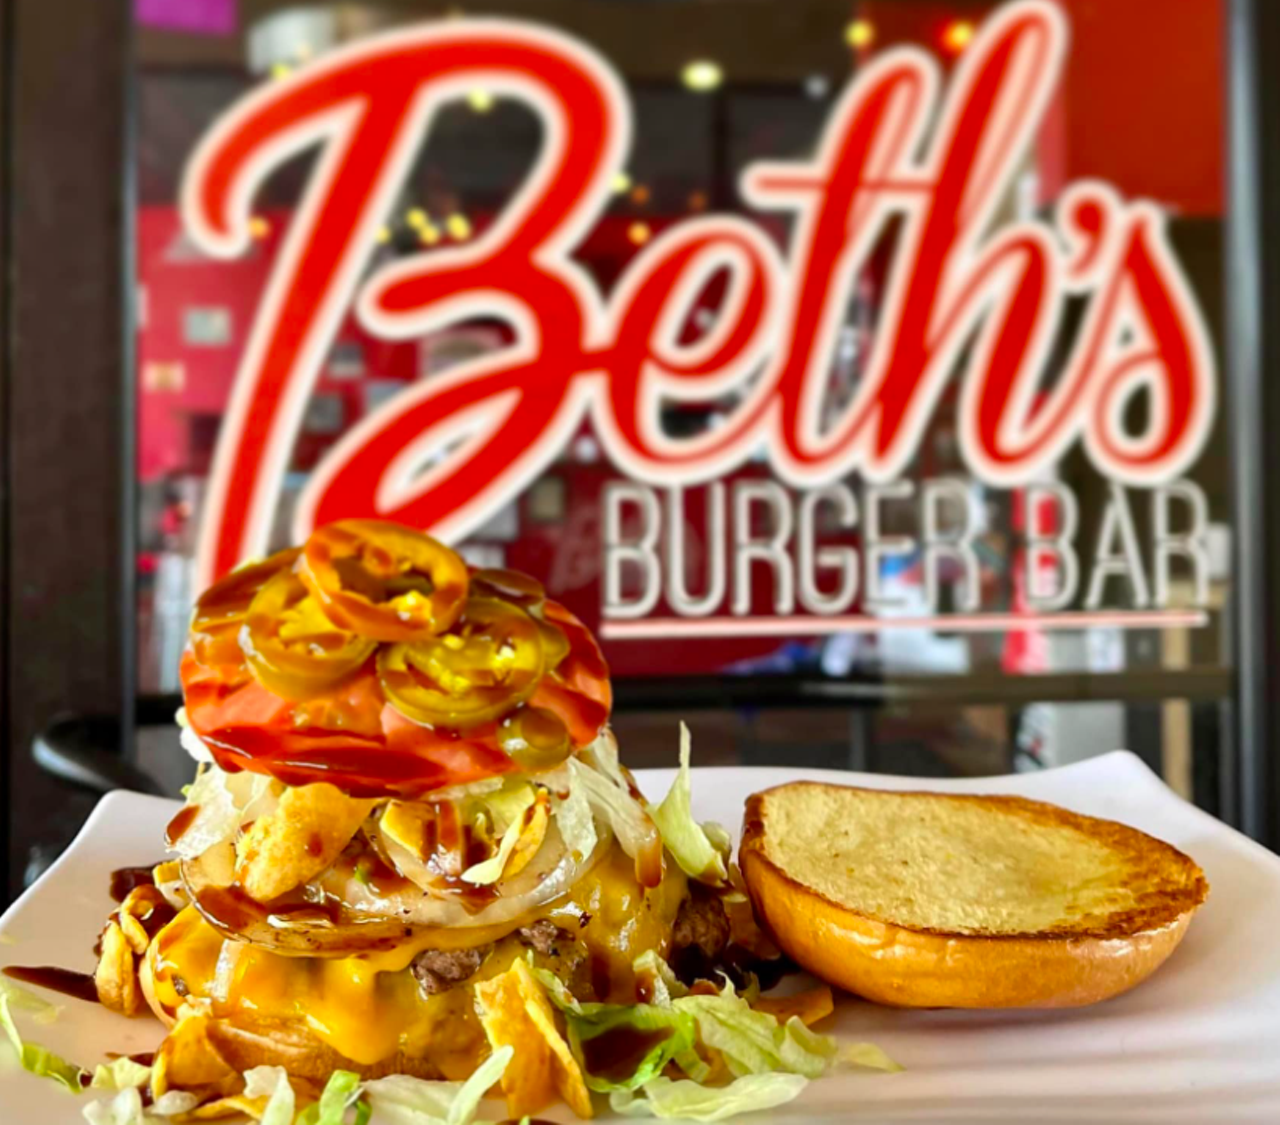 Beth’s Burger Bar
5145 S. Orange Ave., Orlando
With four locations across the city, this joint is a great choice for good ol’-fashioned burgers that won't break the bank, but will definitely fill you up.